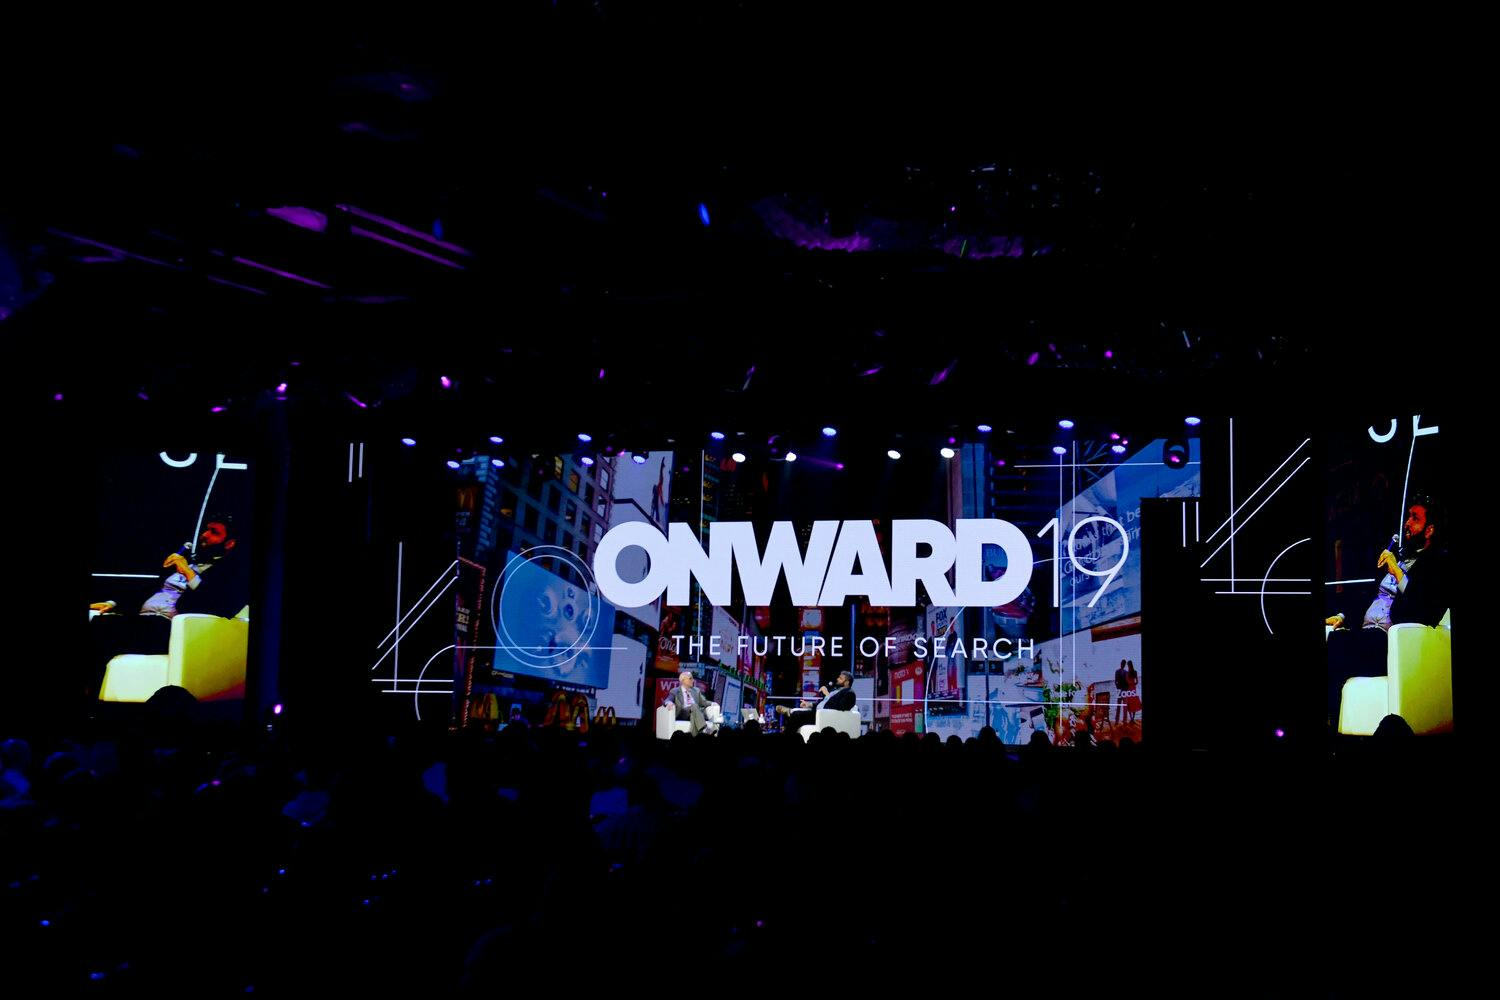 The Onward conference